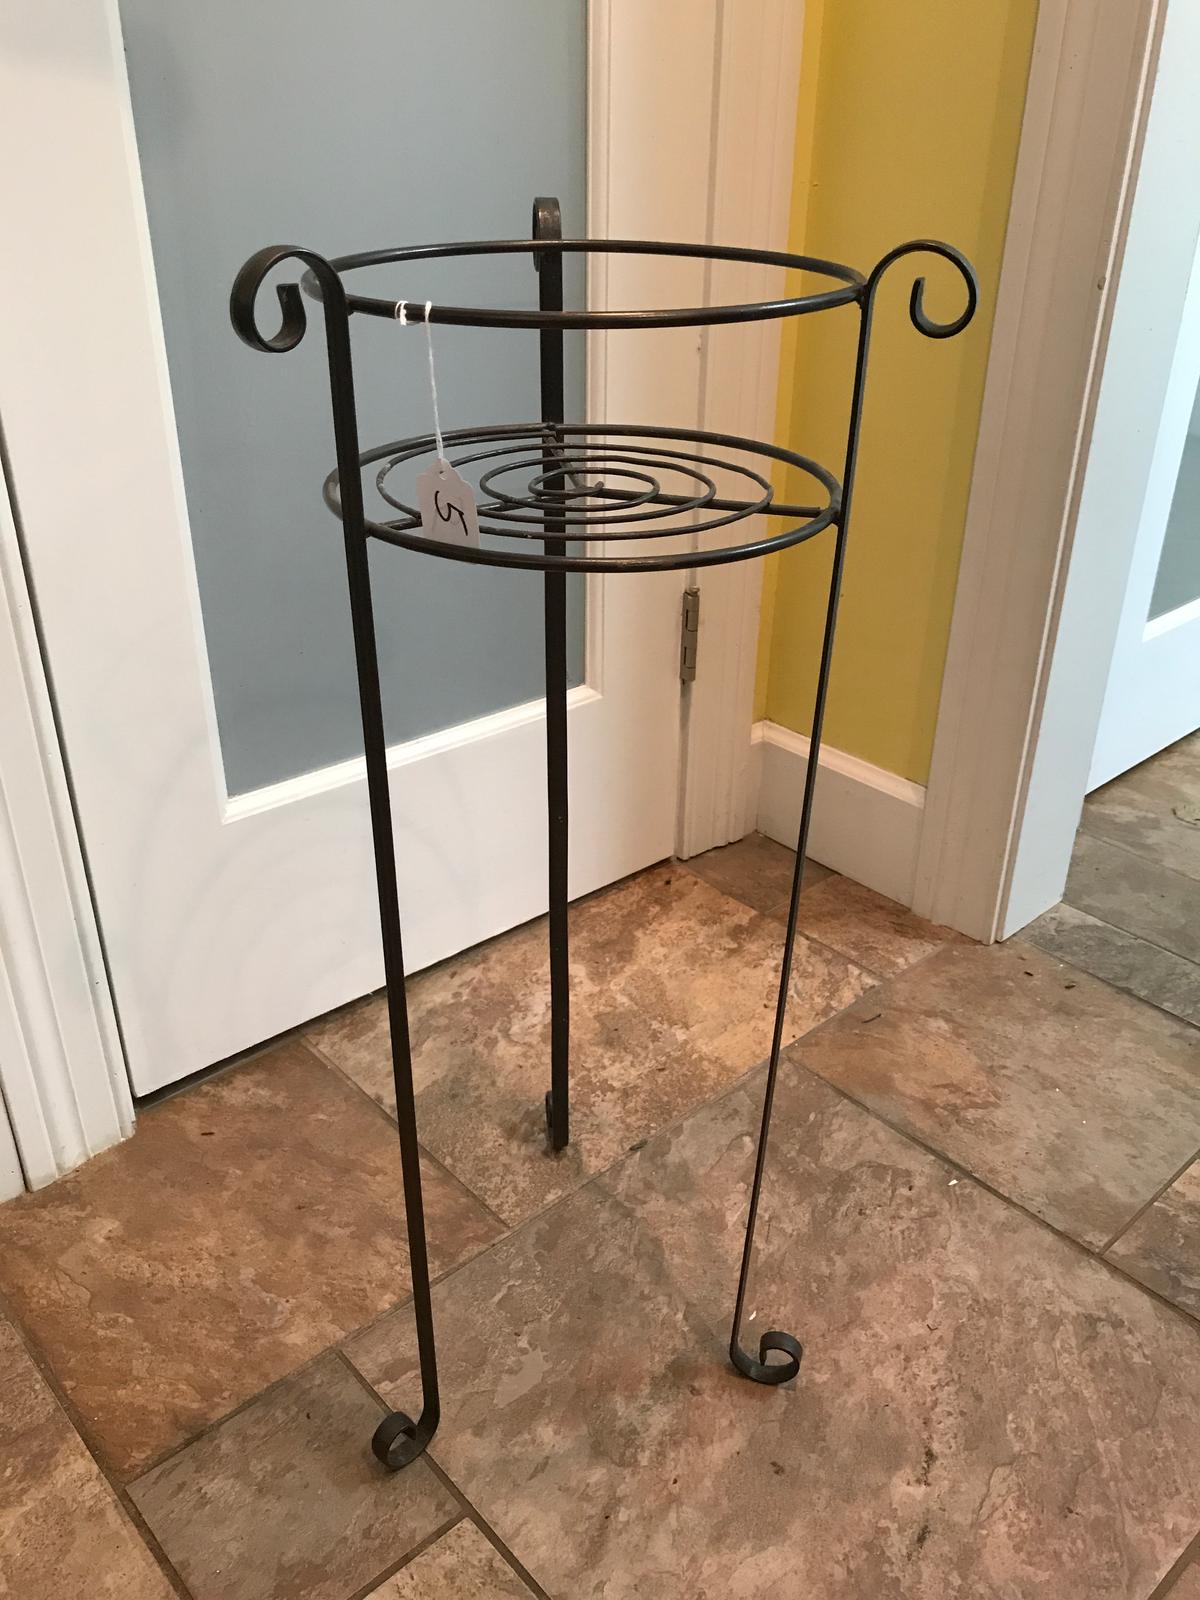 Iron Plant Stand Is 28" Tall